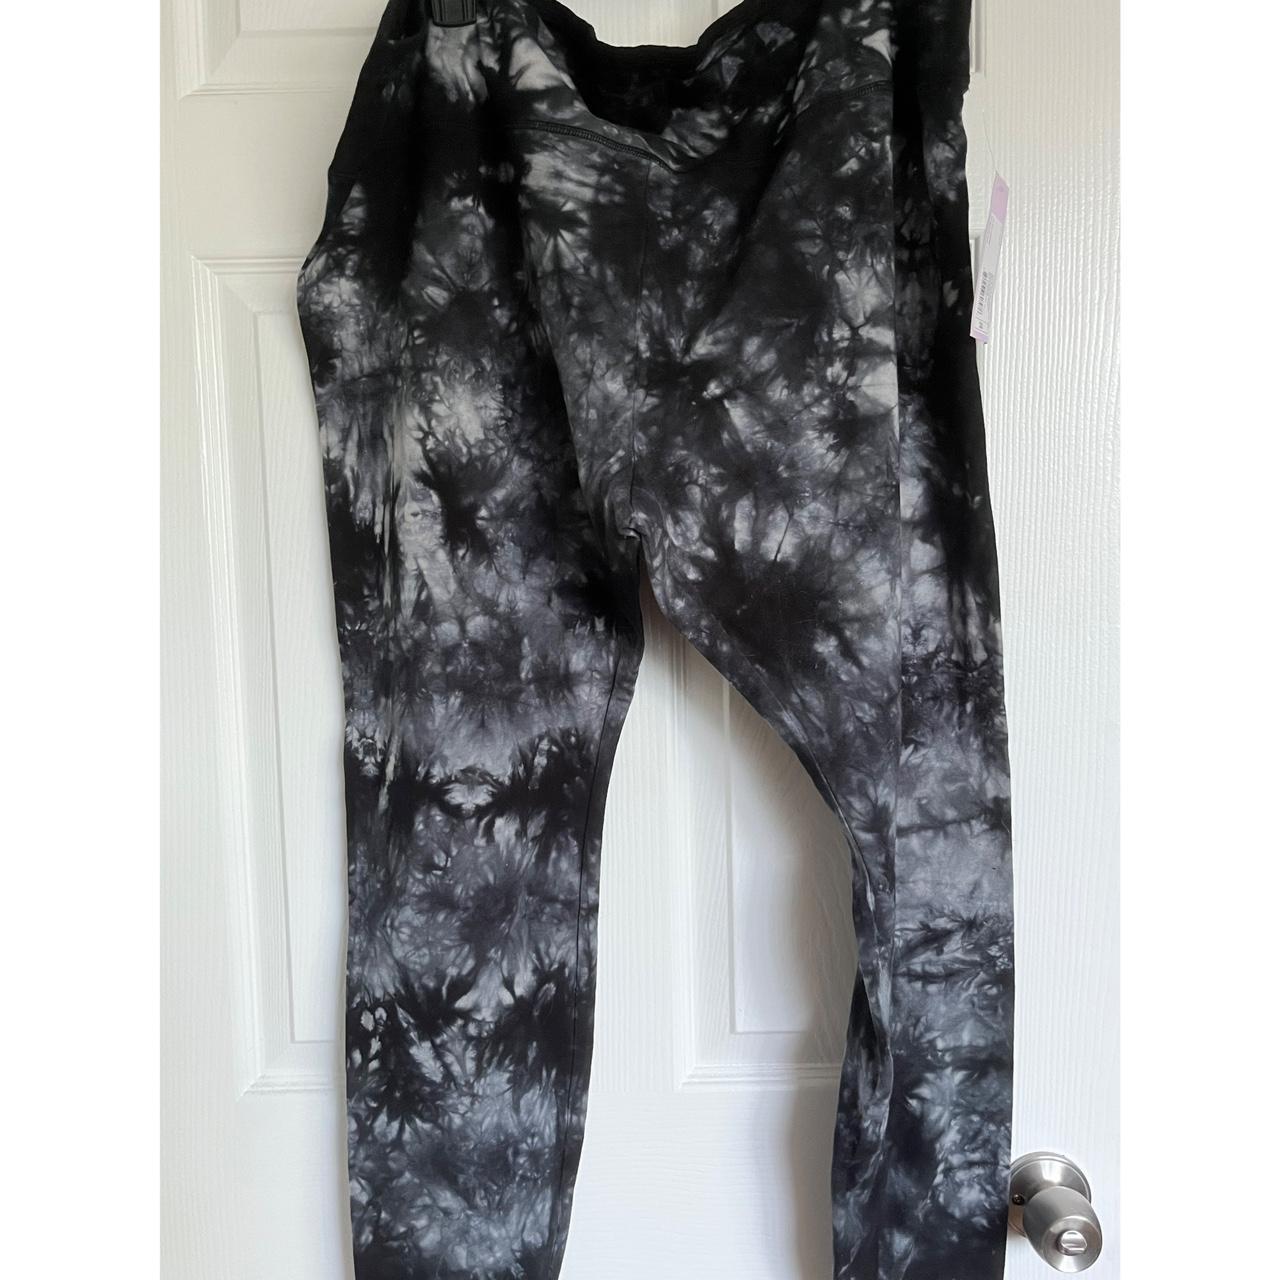 NWT target wild fable high waisted black & white tie - Depop